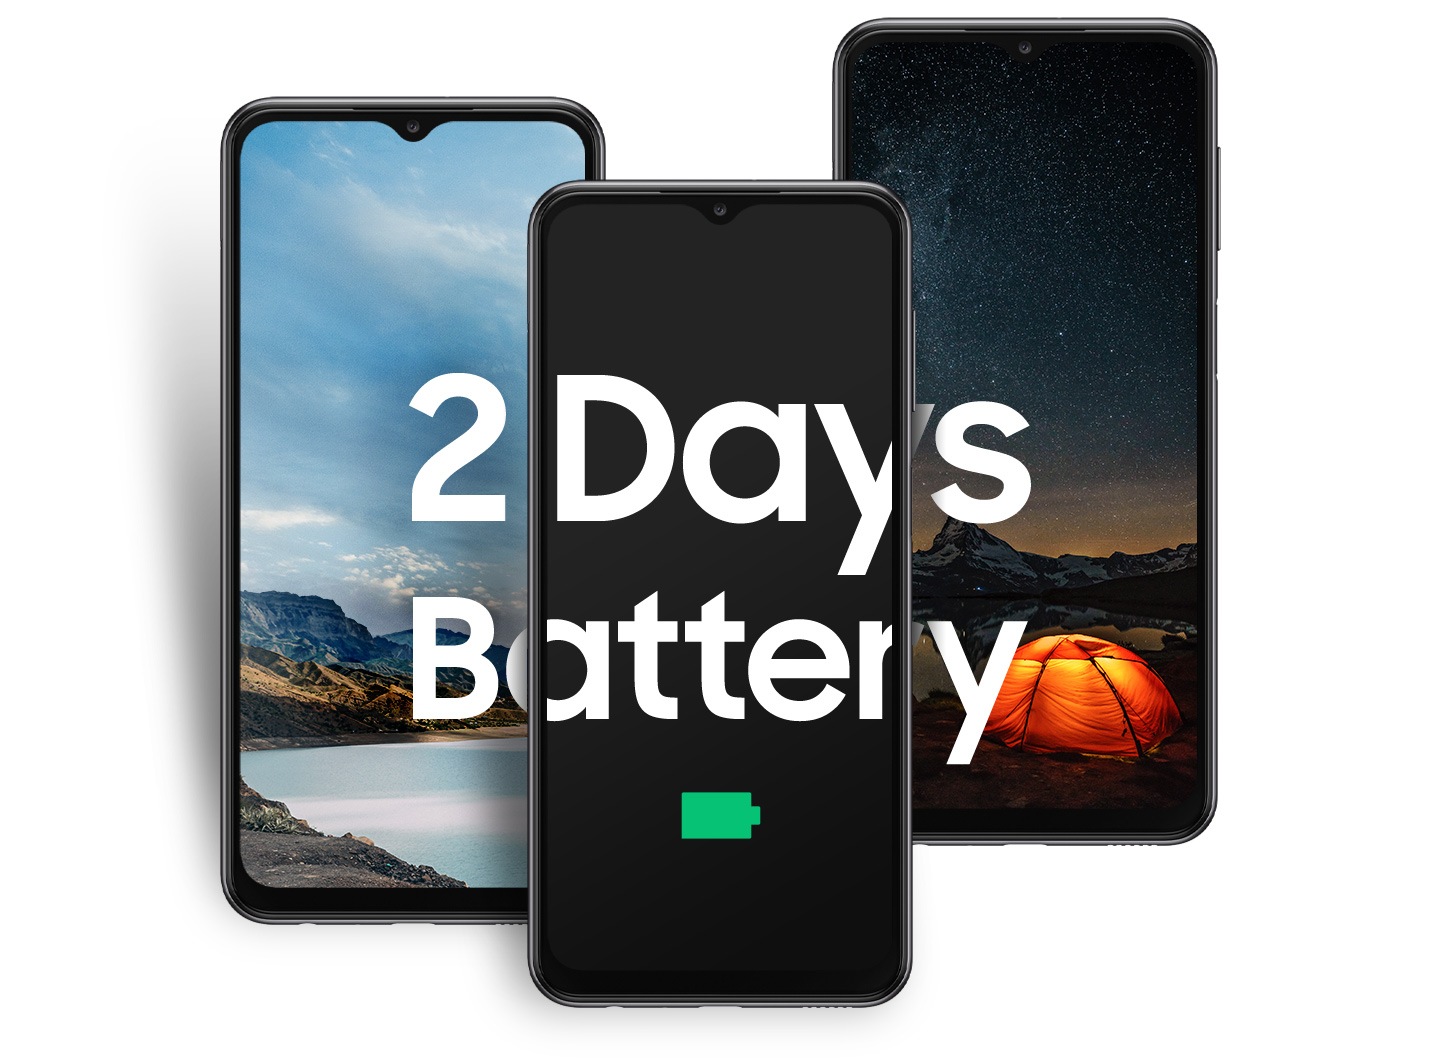 Awesome battery, lasts two days